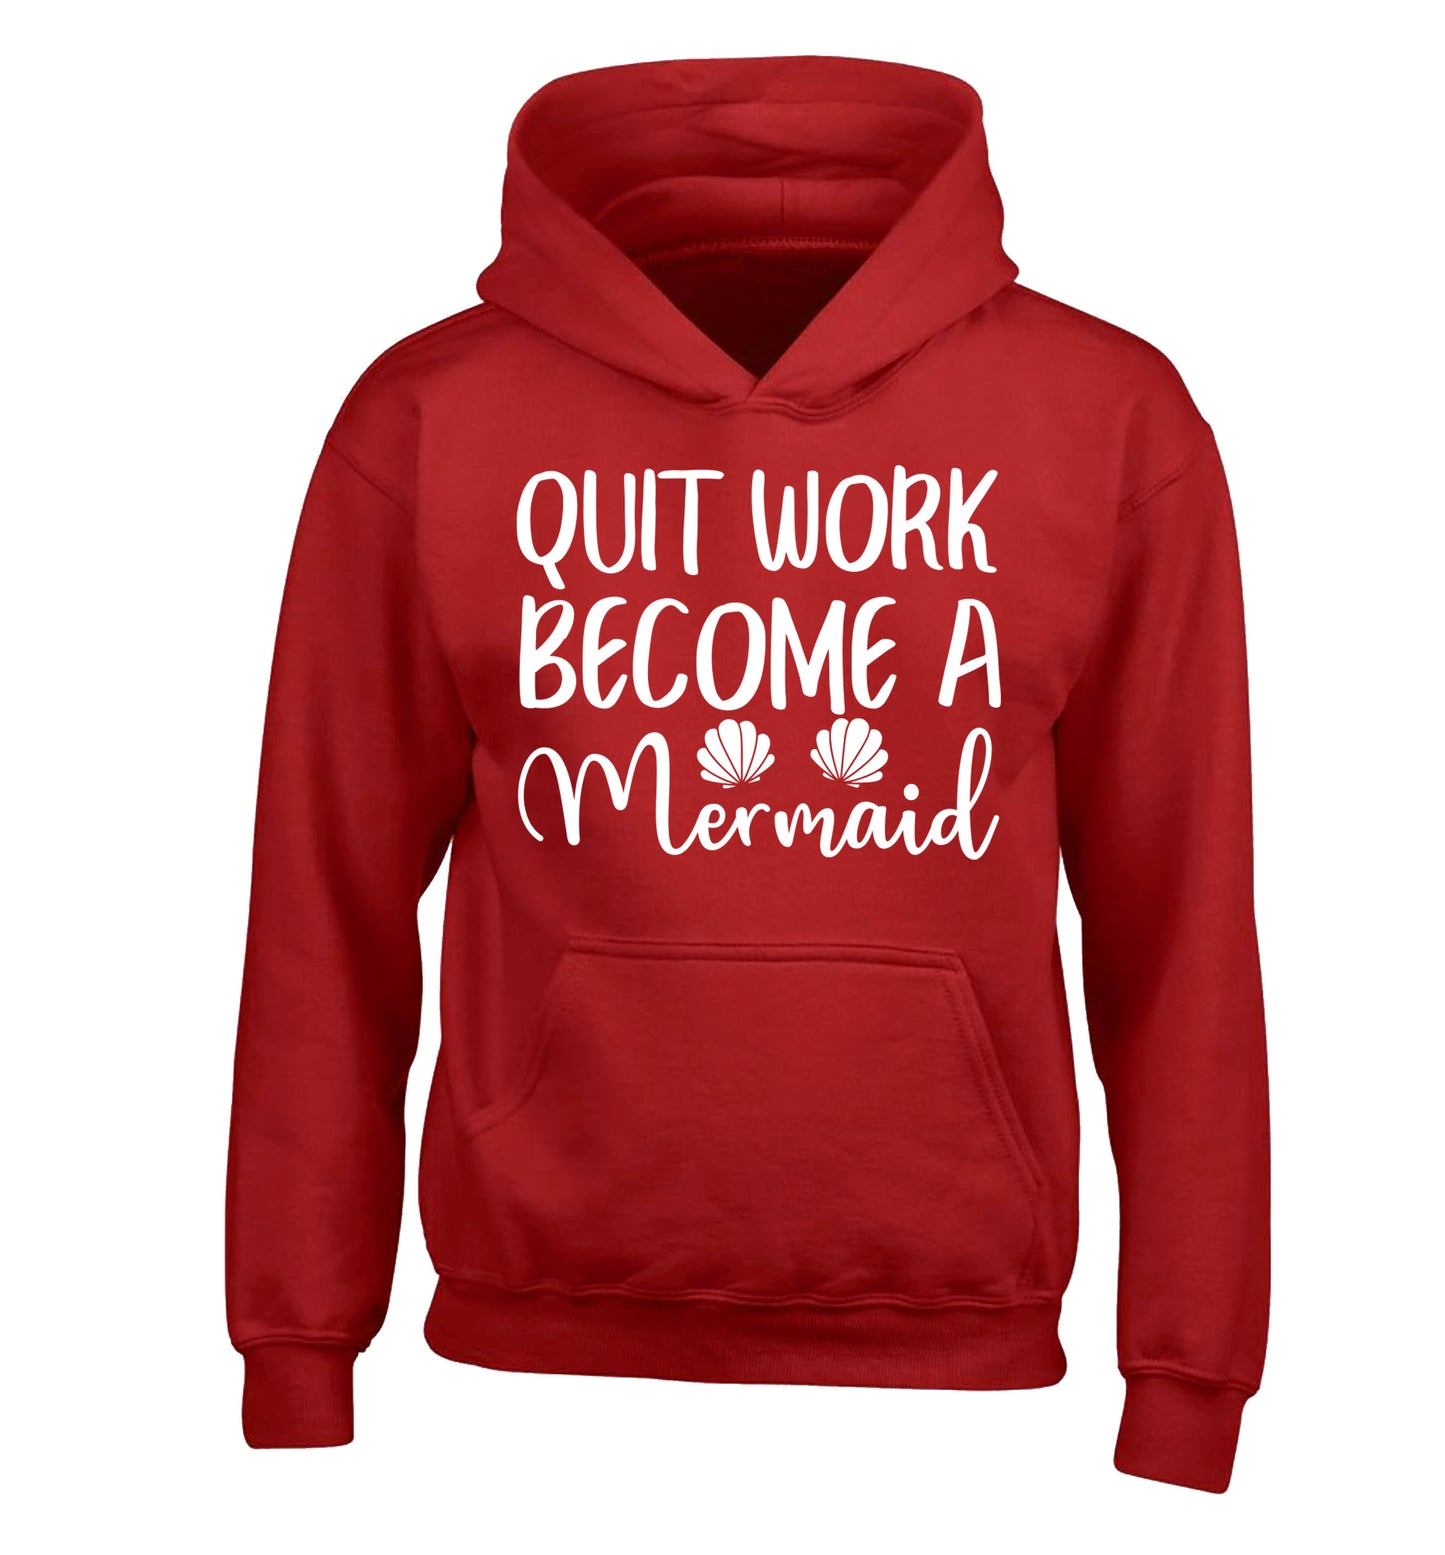 Quit work become a mermaid children's red hoodie 12-13 Years